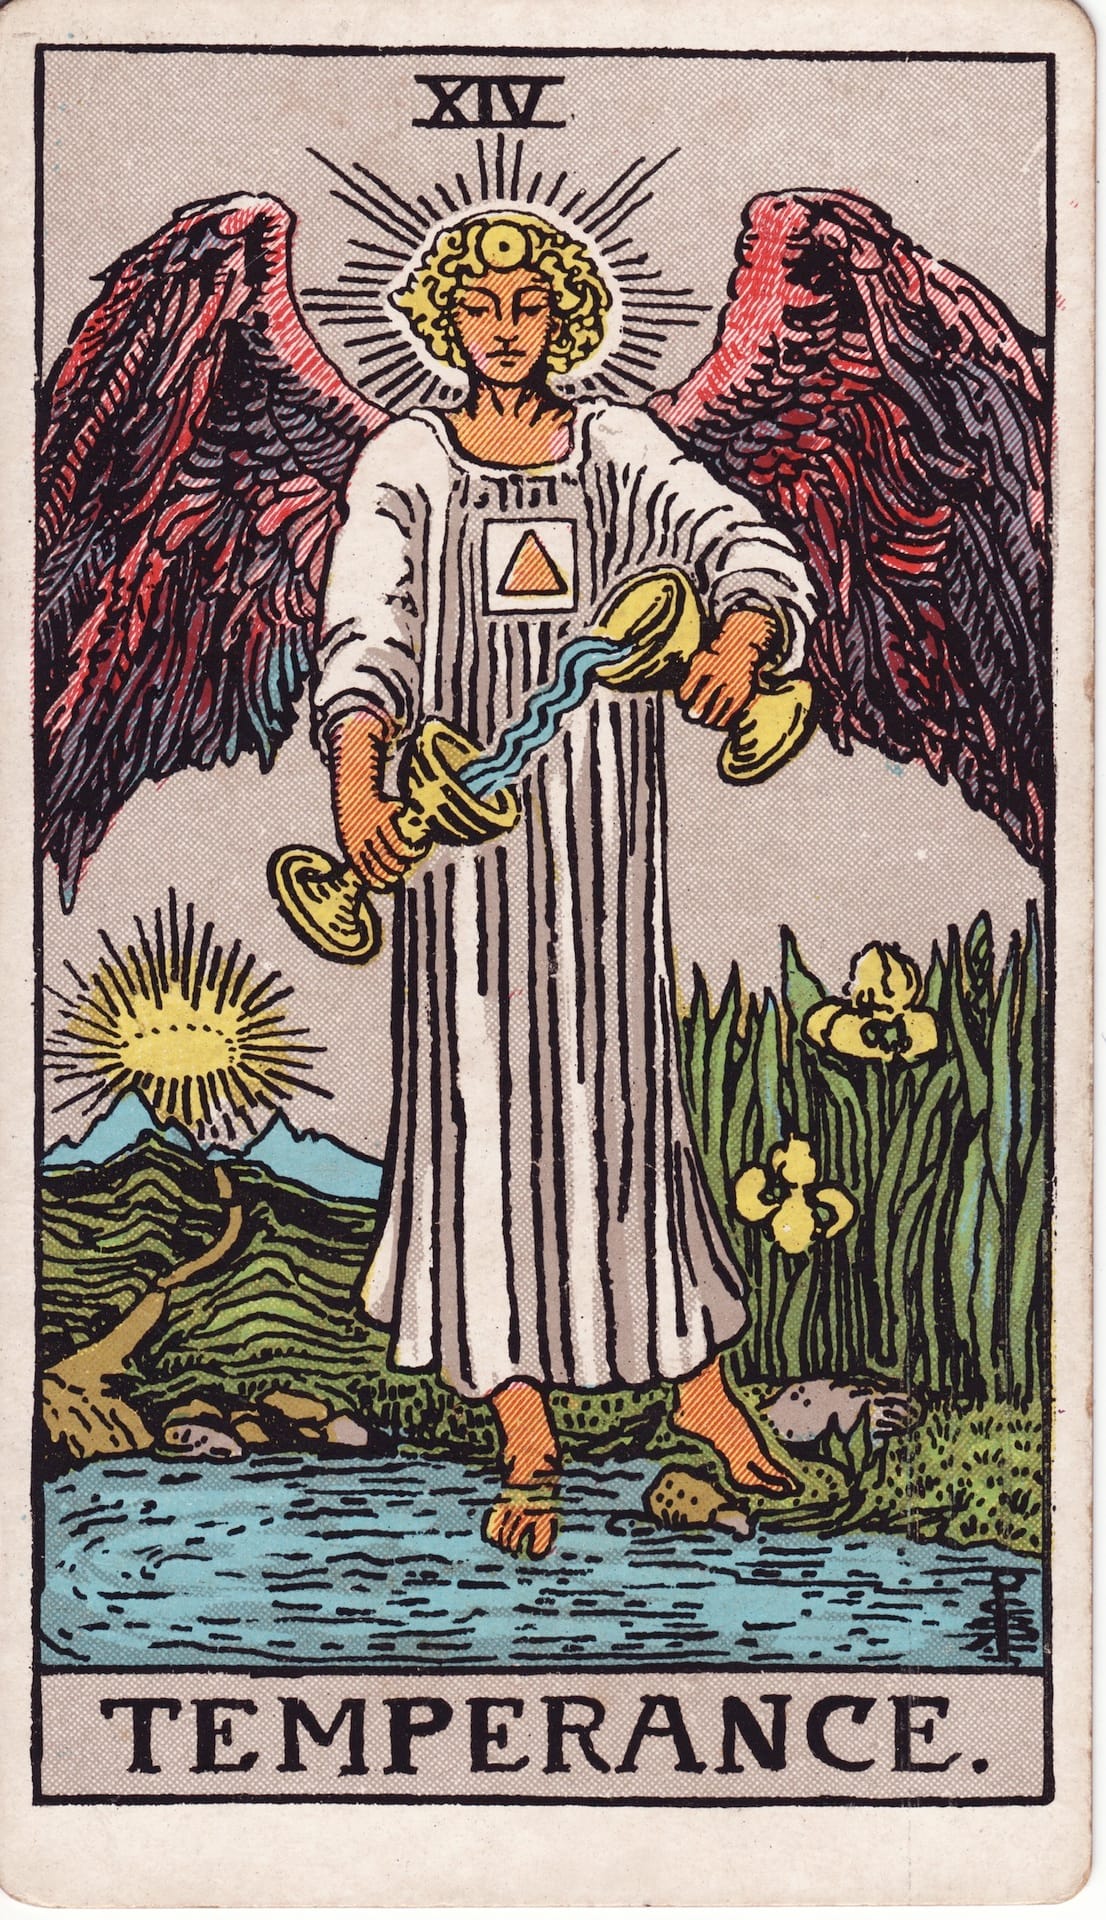 A Tarot card of an angel with red wings in a white robe pouring water from one chalice to another while flying and having one foot in a pond. The word "Temperance" is across the bottom.